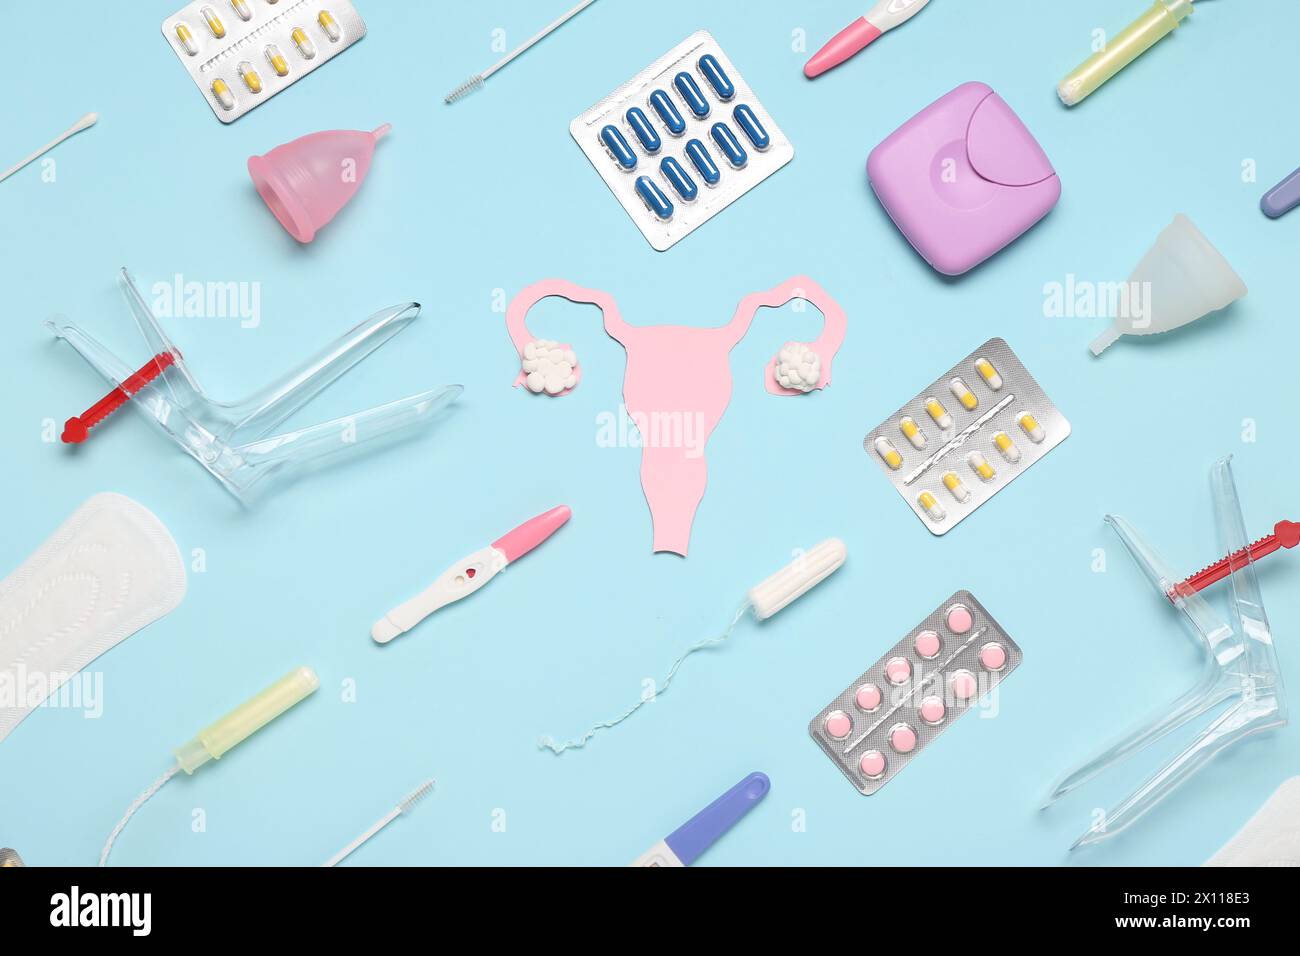 Paper uterus with gynecological speculums, pills, tampons and menstrual cups on blue background Stock Photo